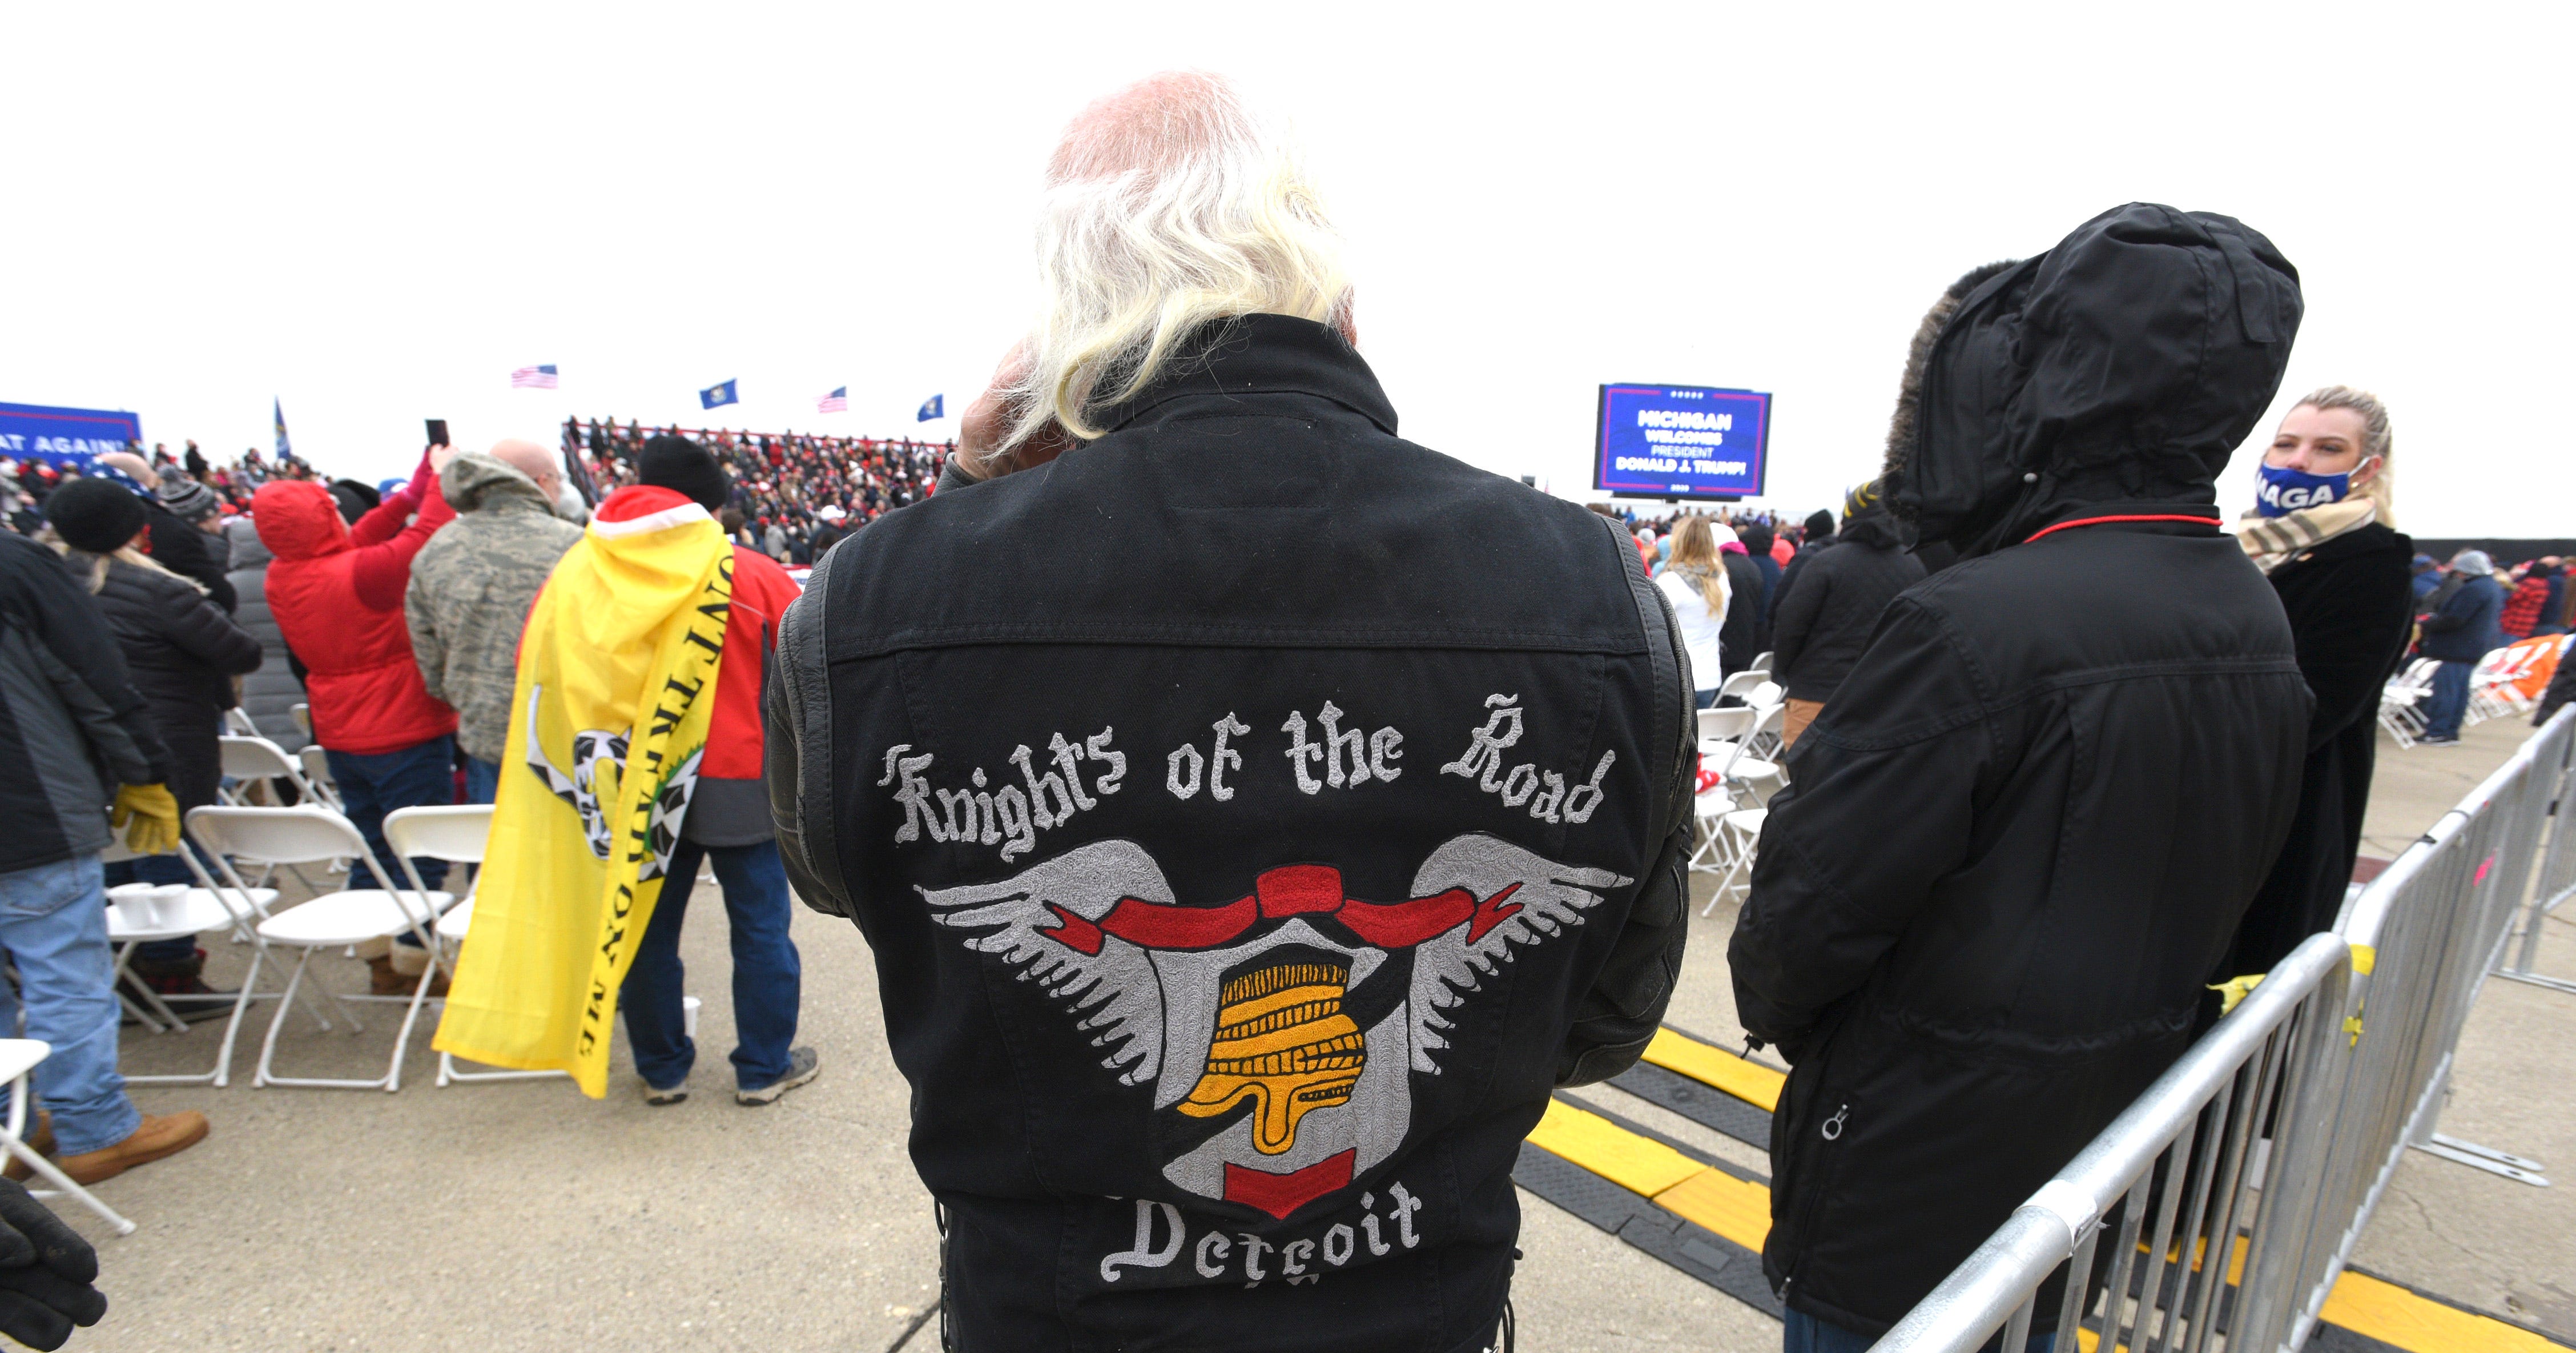 A Knights of the Road Detroit member waits in the crowd.